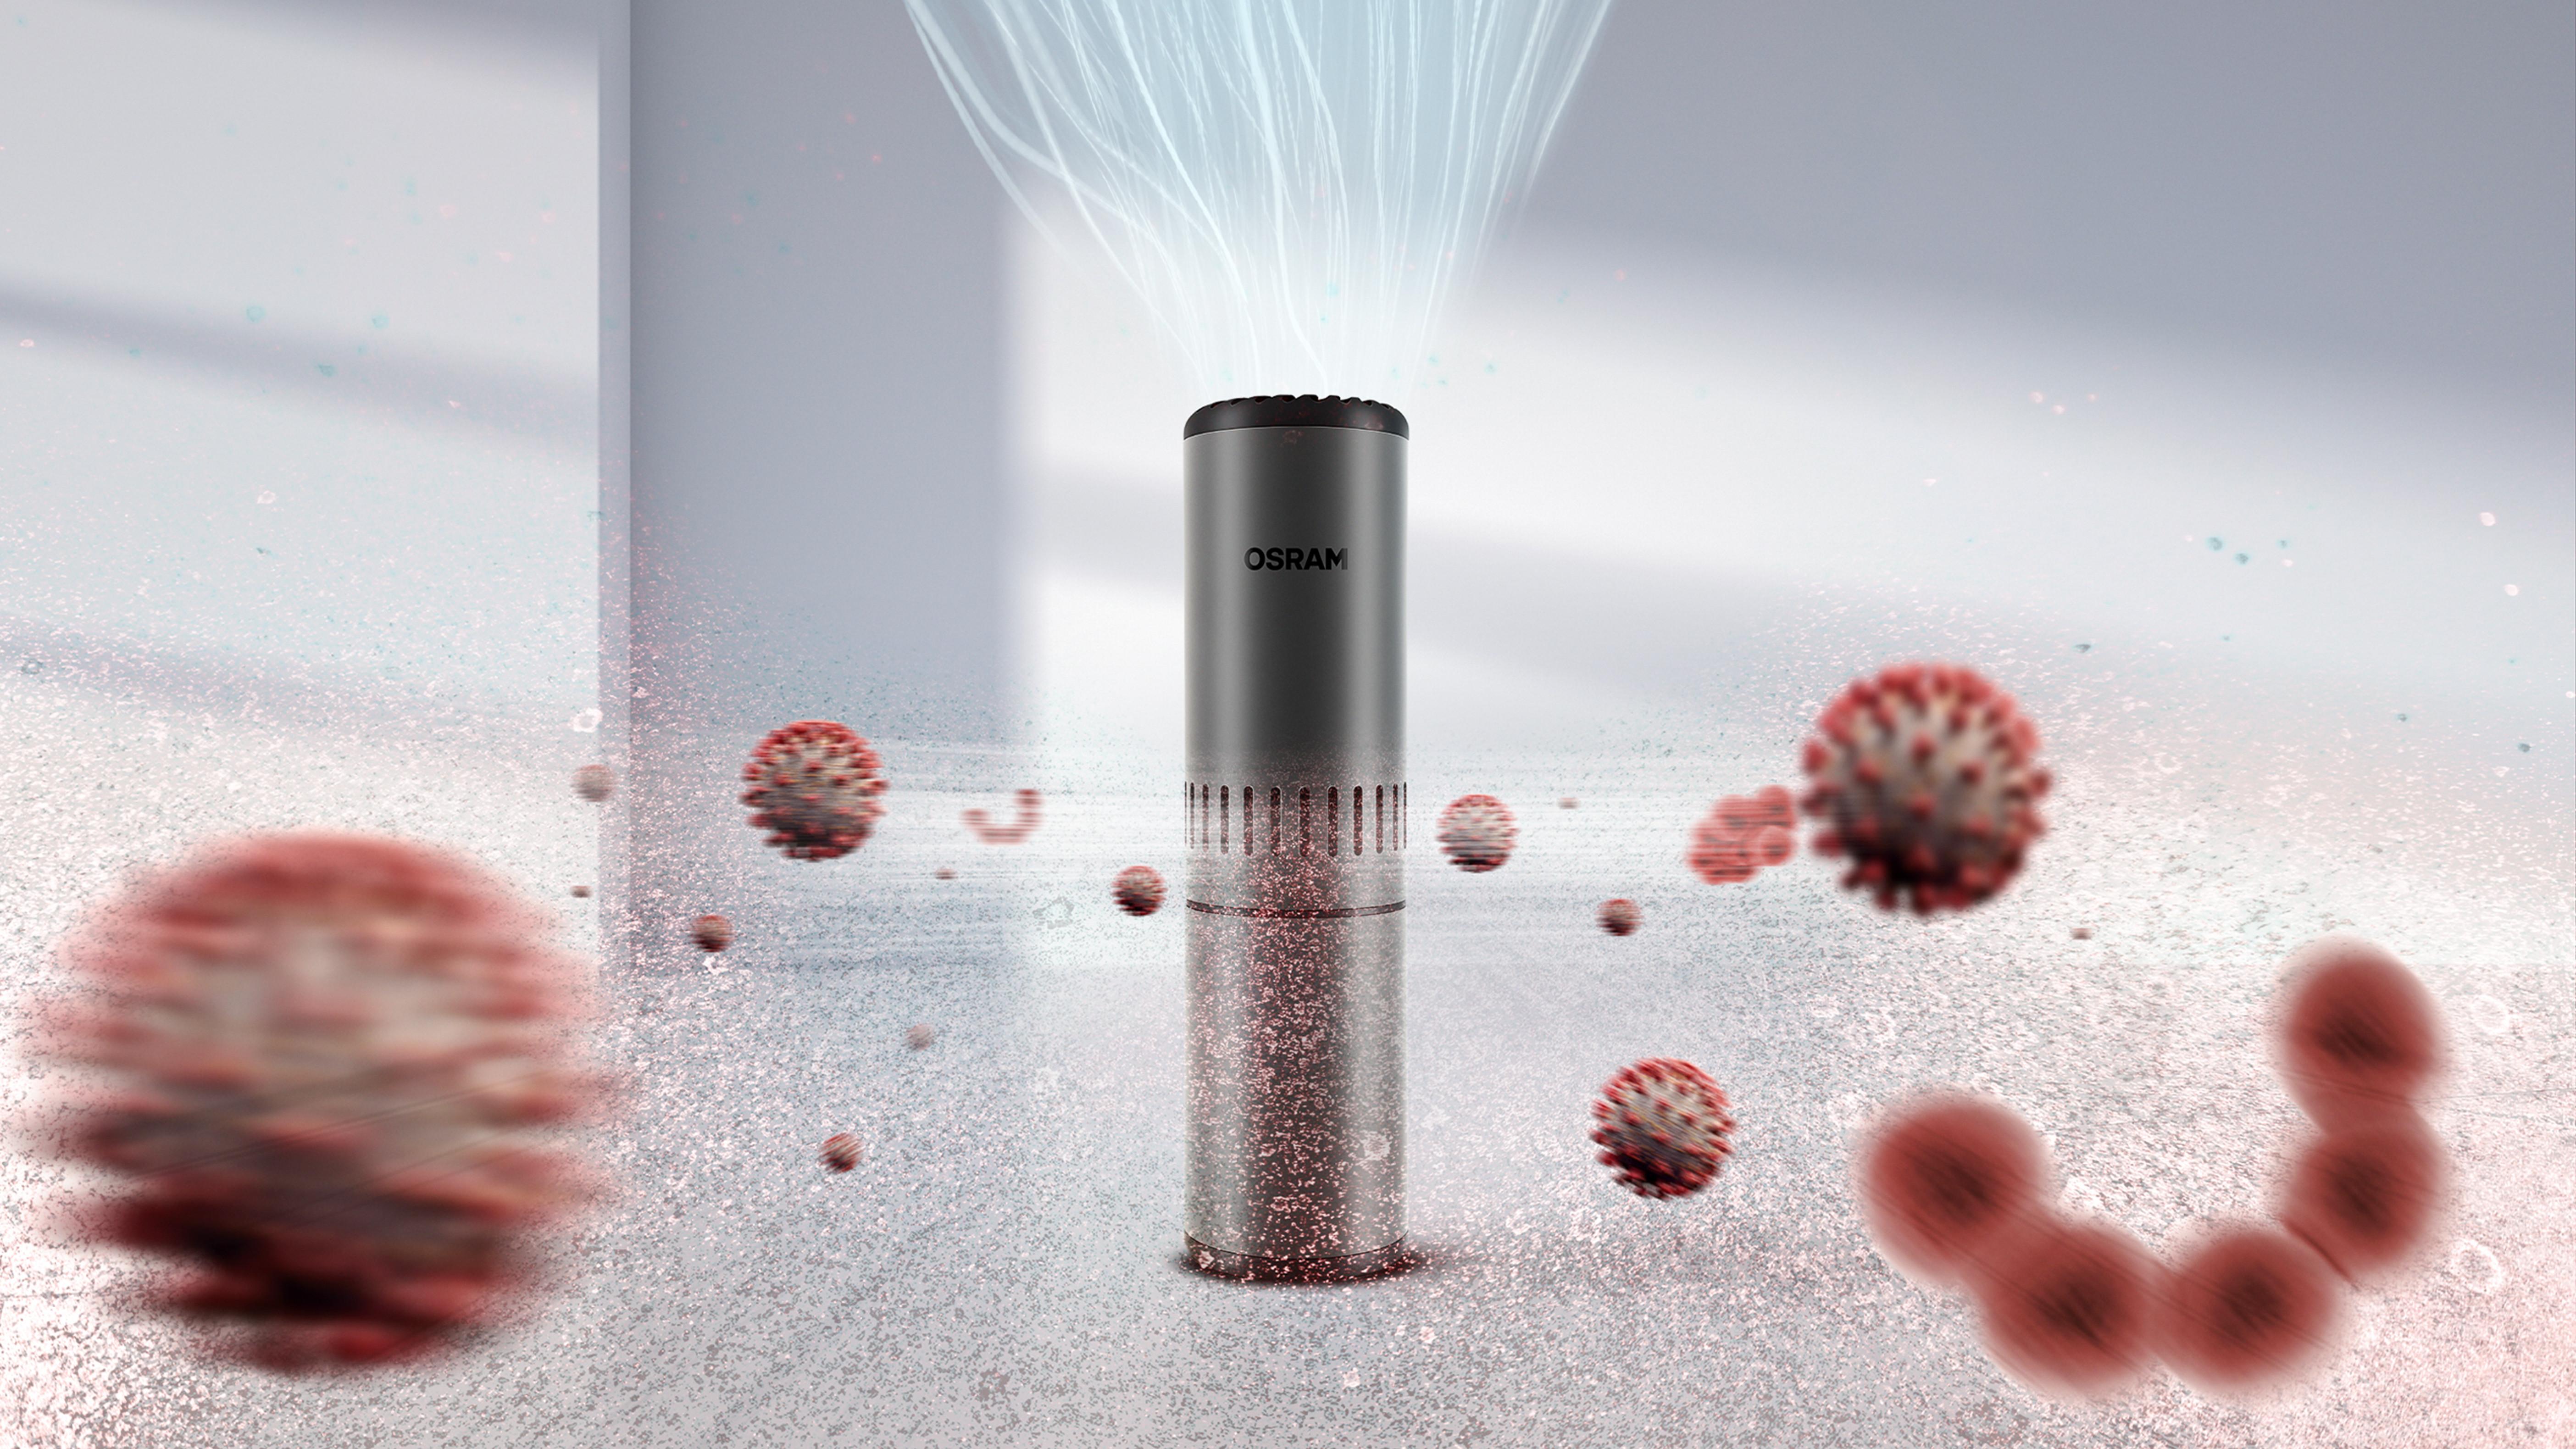 Germ killer to go: Osram announces the fight against viruses and bacteria with portable UV-C air purifiers